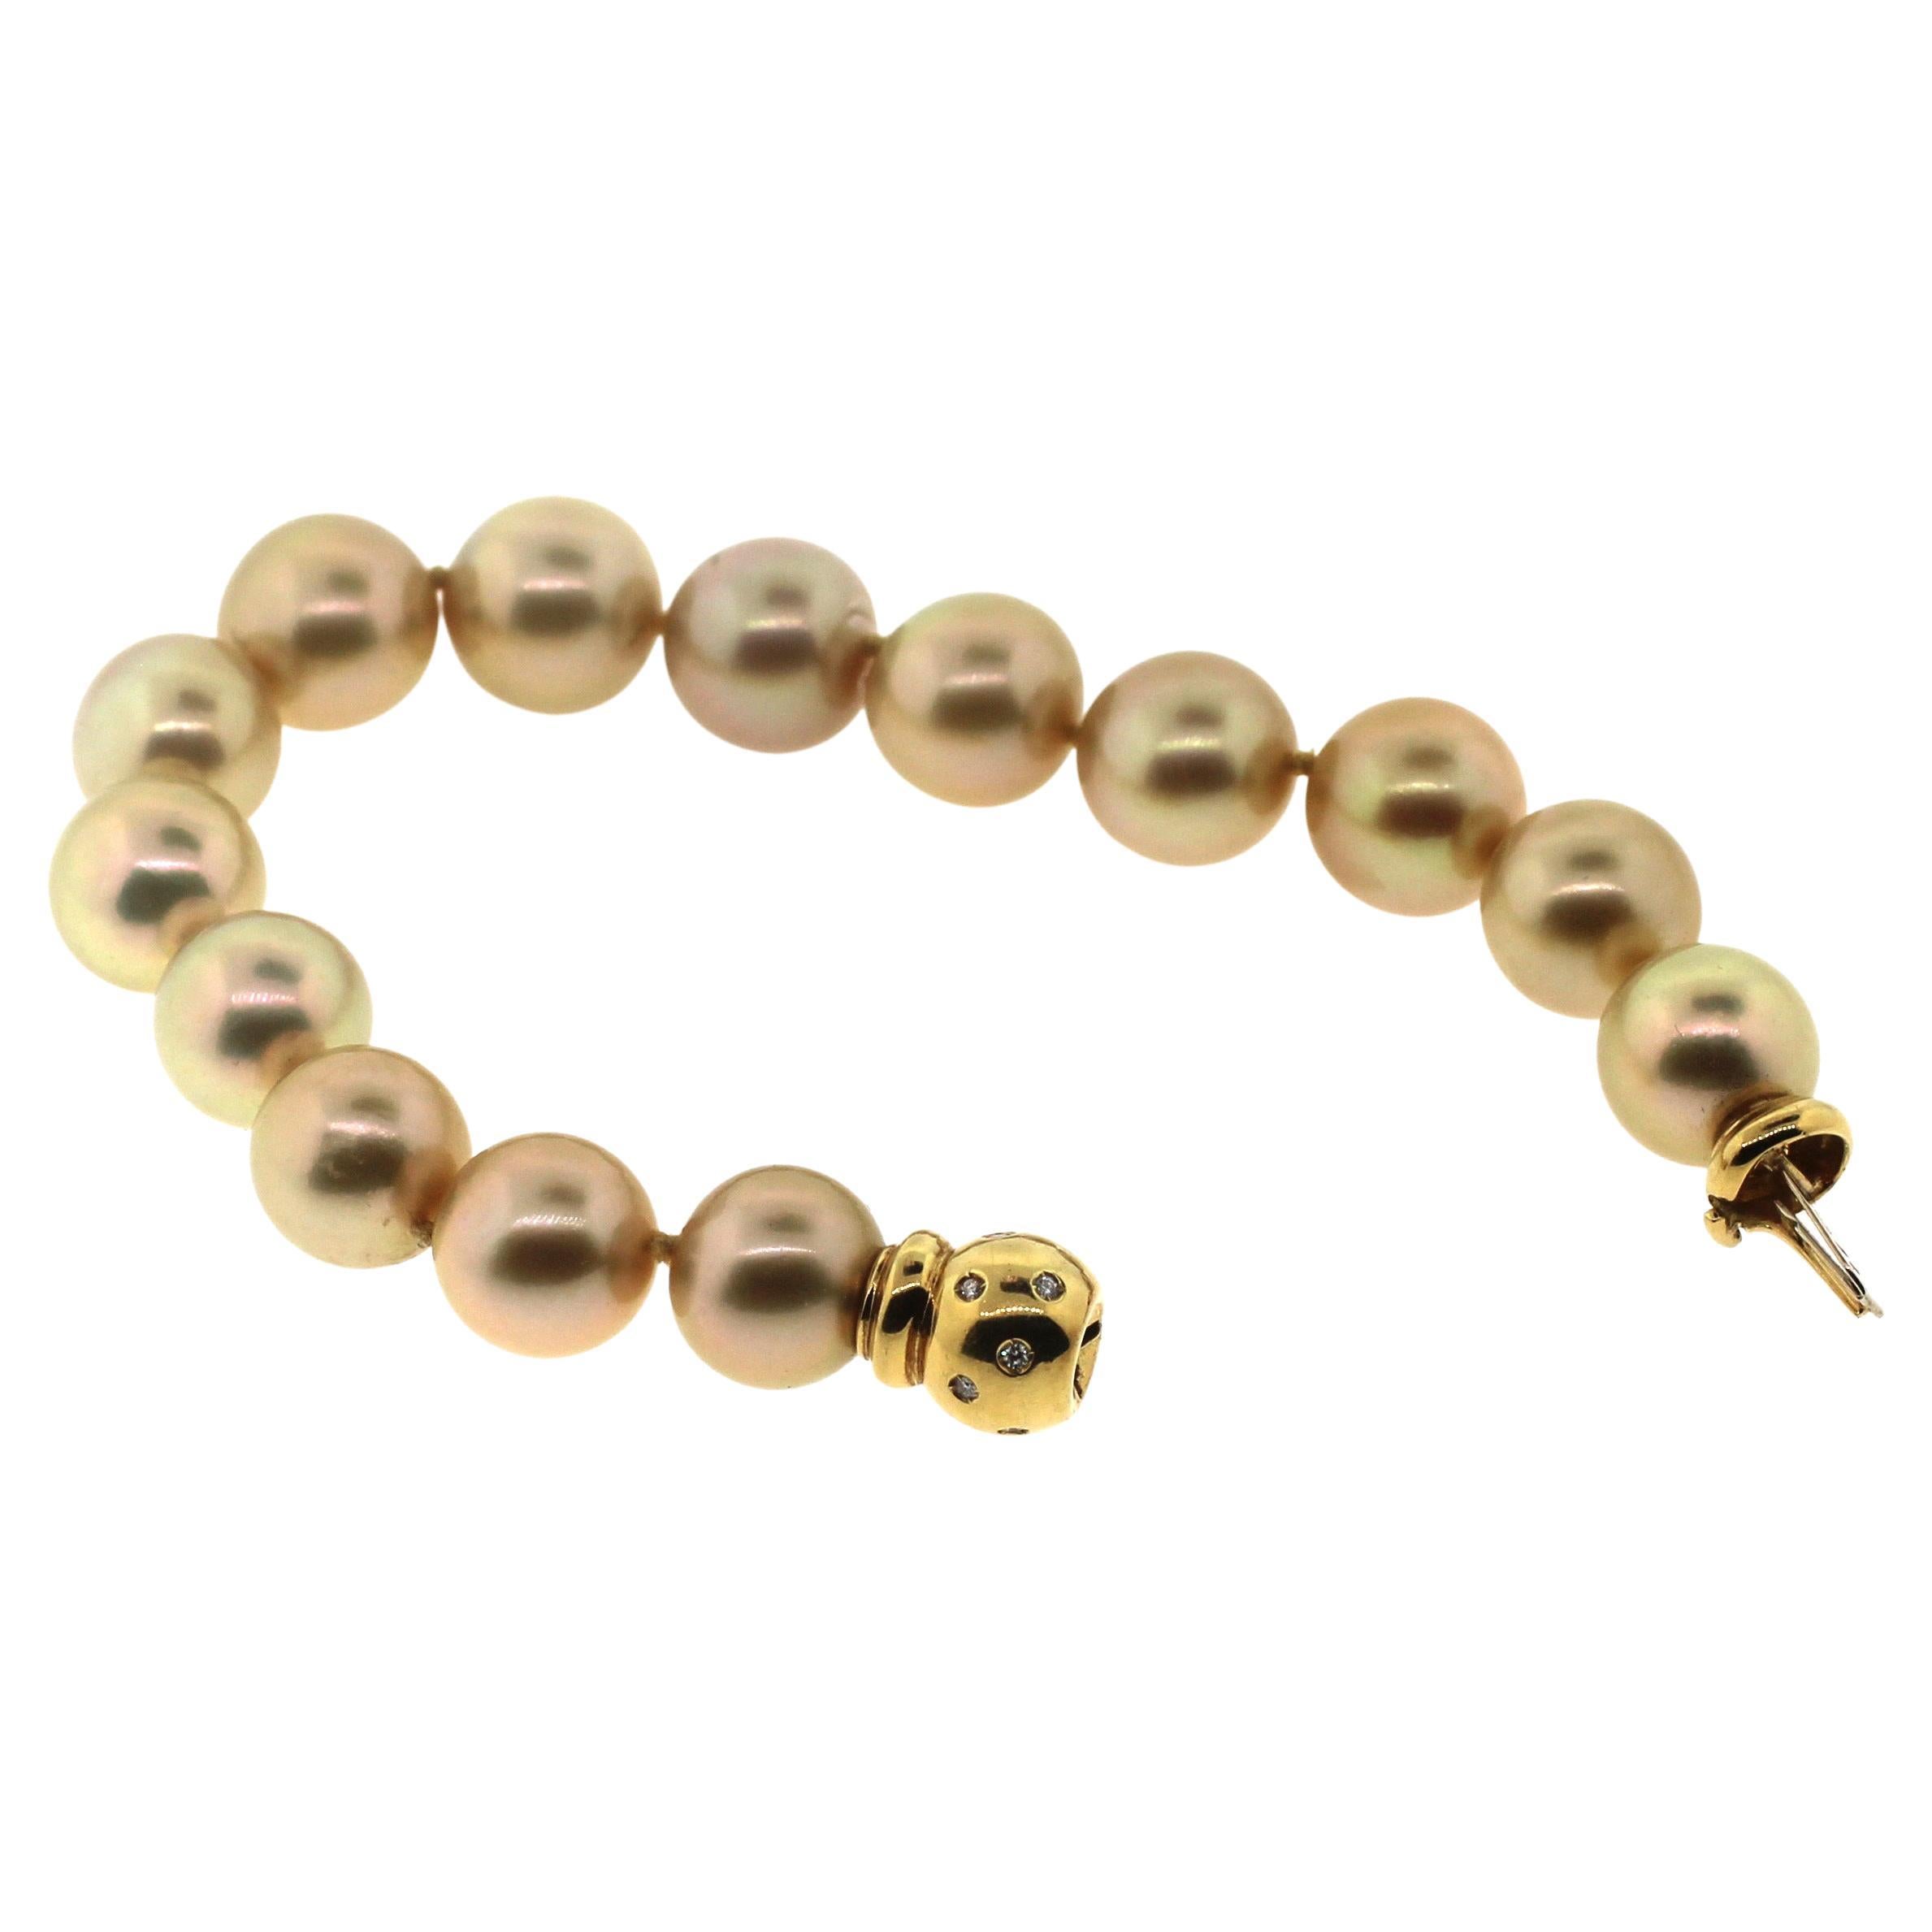 Hakimoto By Jewel Of Ocean 18K Golde South Sea Bracelet
18K White Gold  With 0.2 Carts Of Diamonds
Weight (g): 52
Cultured Golden South Sea Pearl 
Pearl Size: 13x13 mm 
Pearl Shape: Round
Body color: Natural Golden
Orient: Very Good
Luster: Very